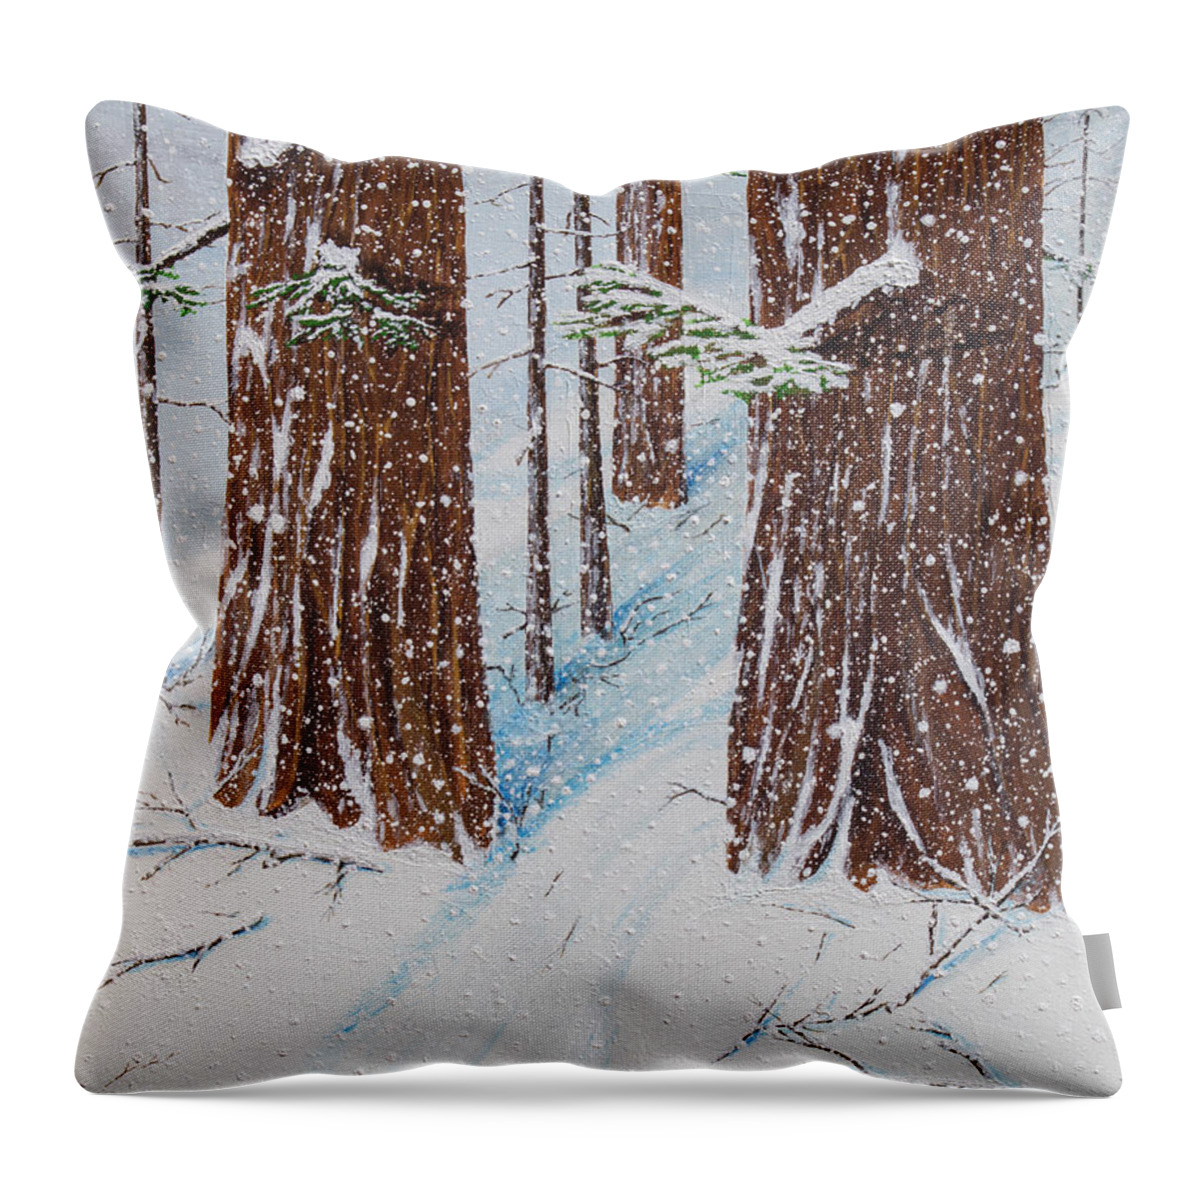  Redwoods In Snow Throw Pillow featuring the painting Three Redwoods in Snow by L J Oakes